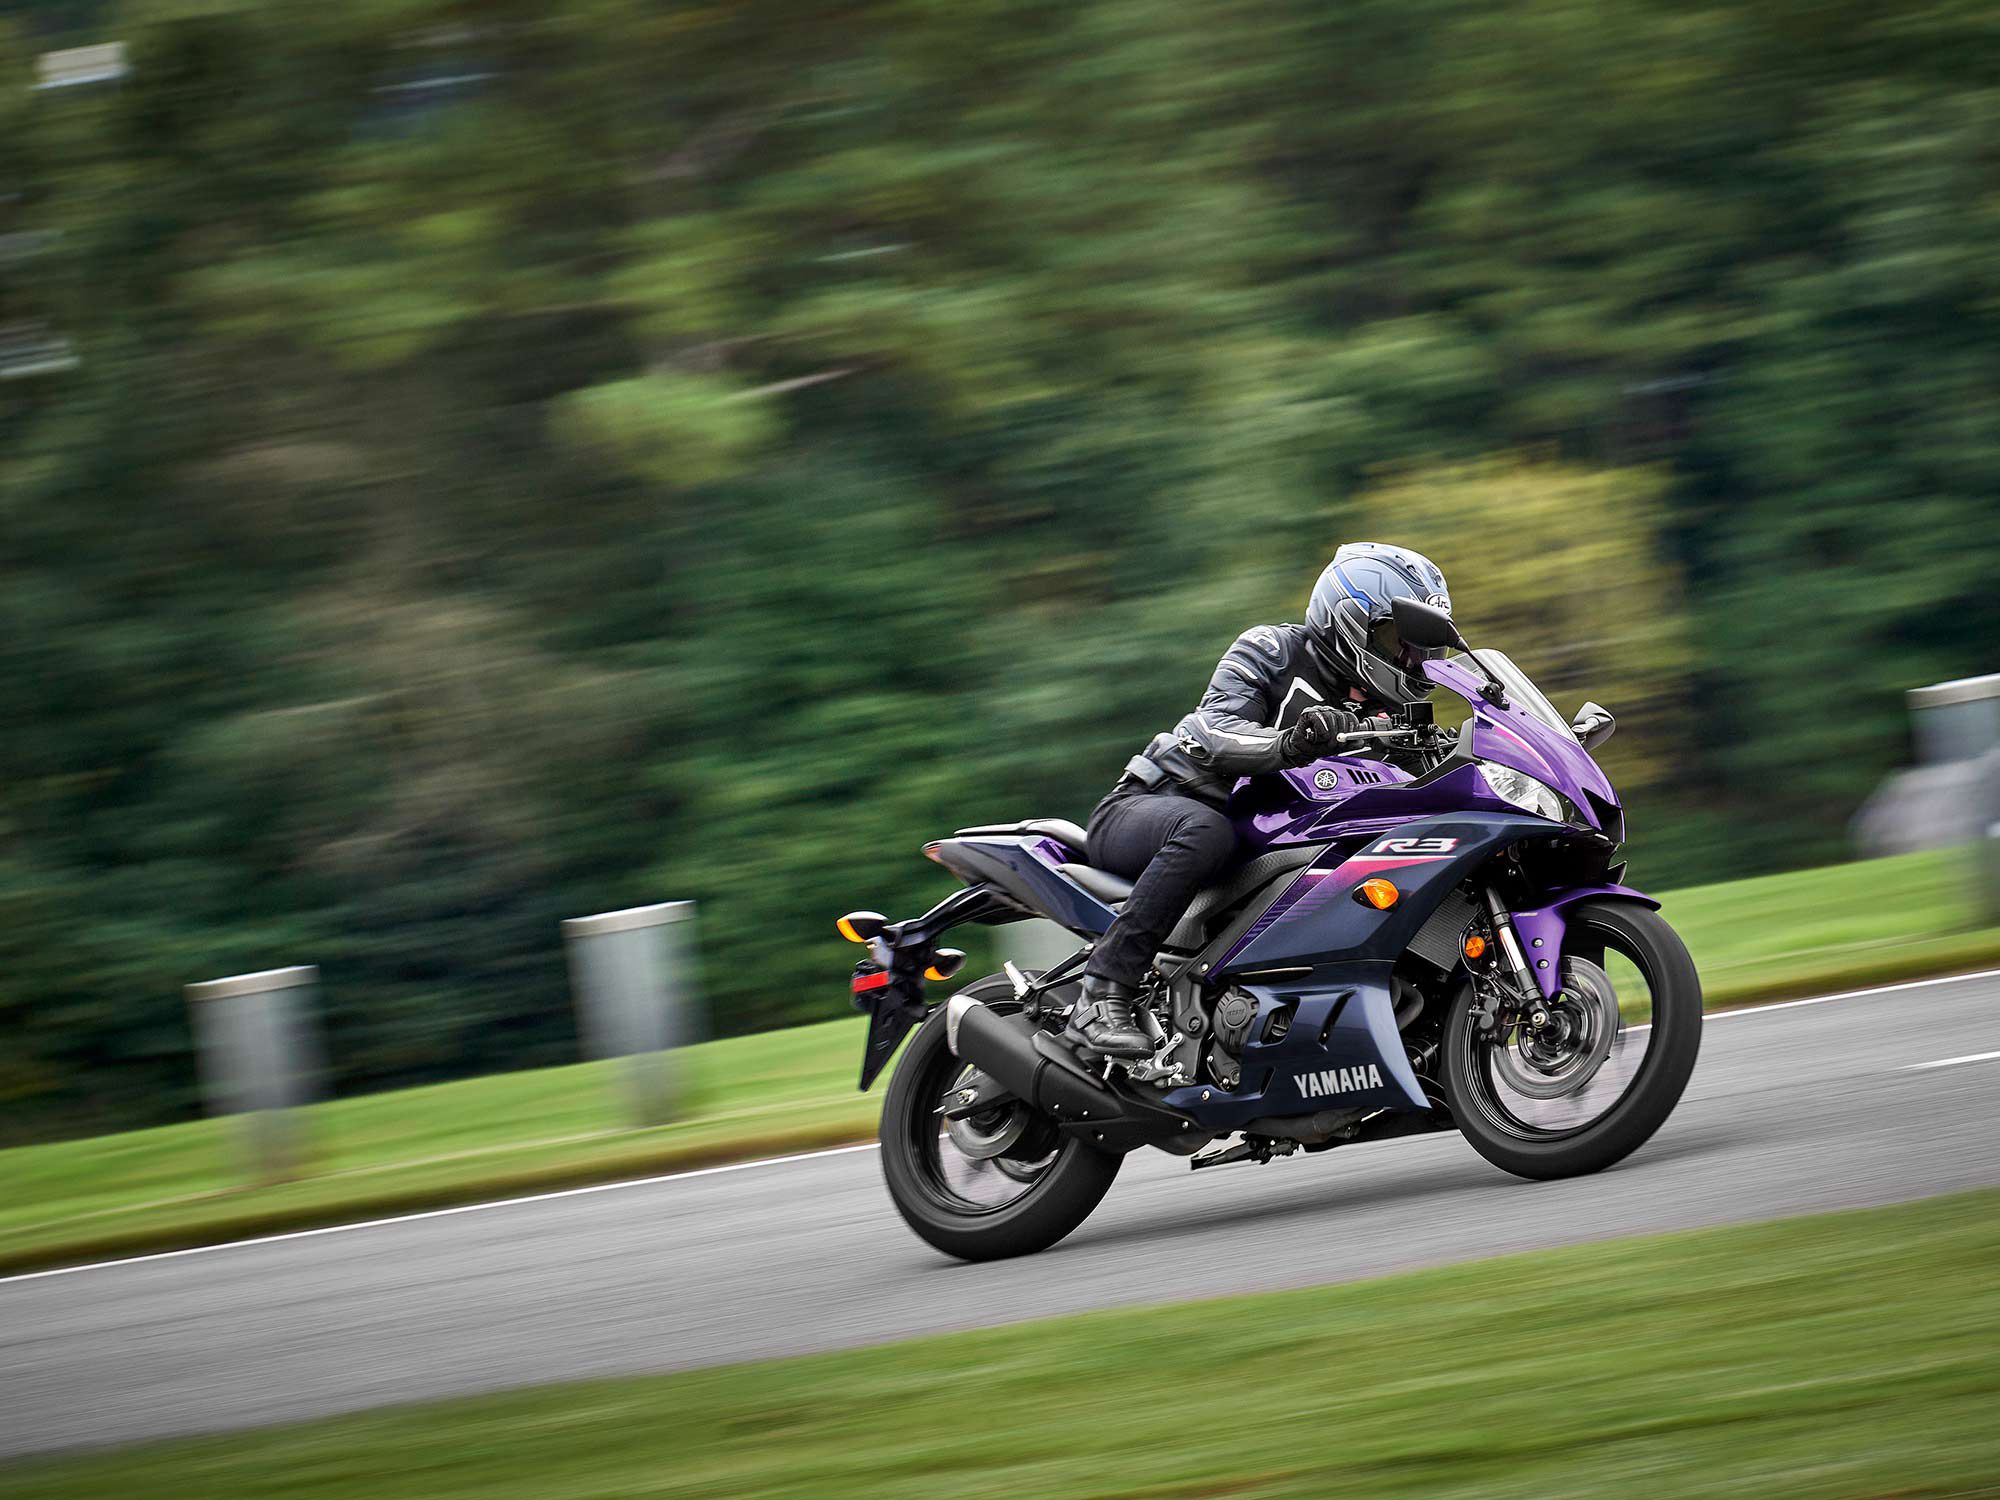 Purple is not all that common on a stock motorcycle, but the R3 is working it.